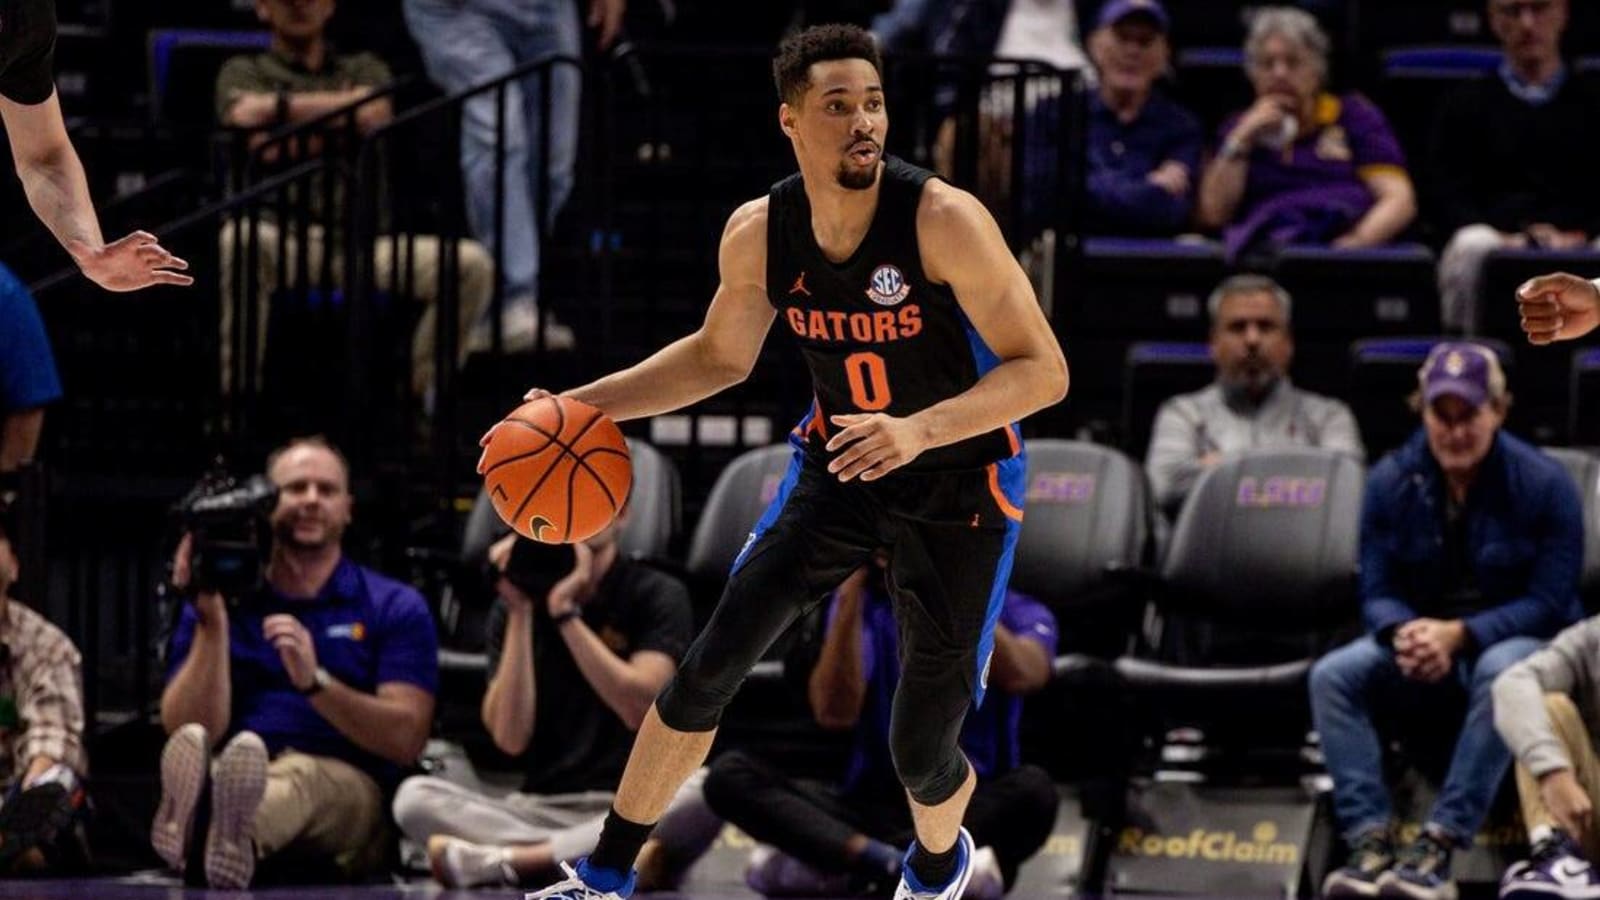 Gators rally in 2nd half to topple LSU by 12